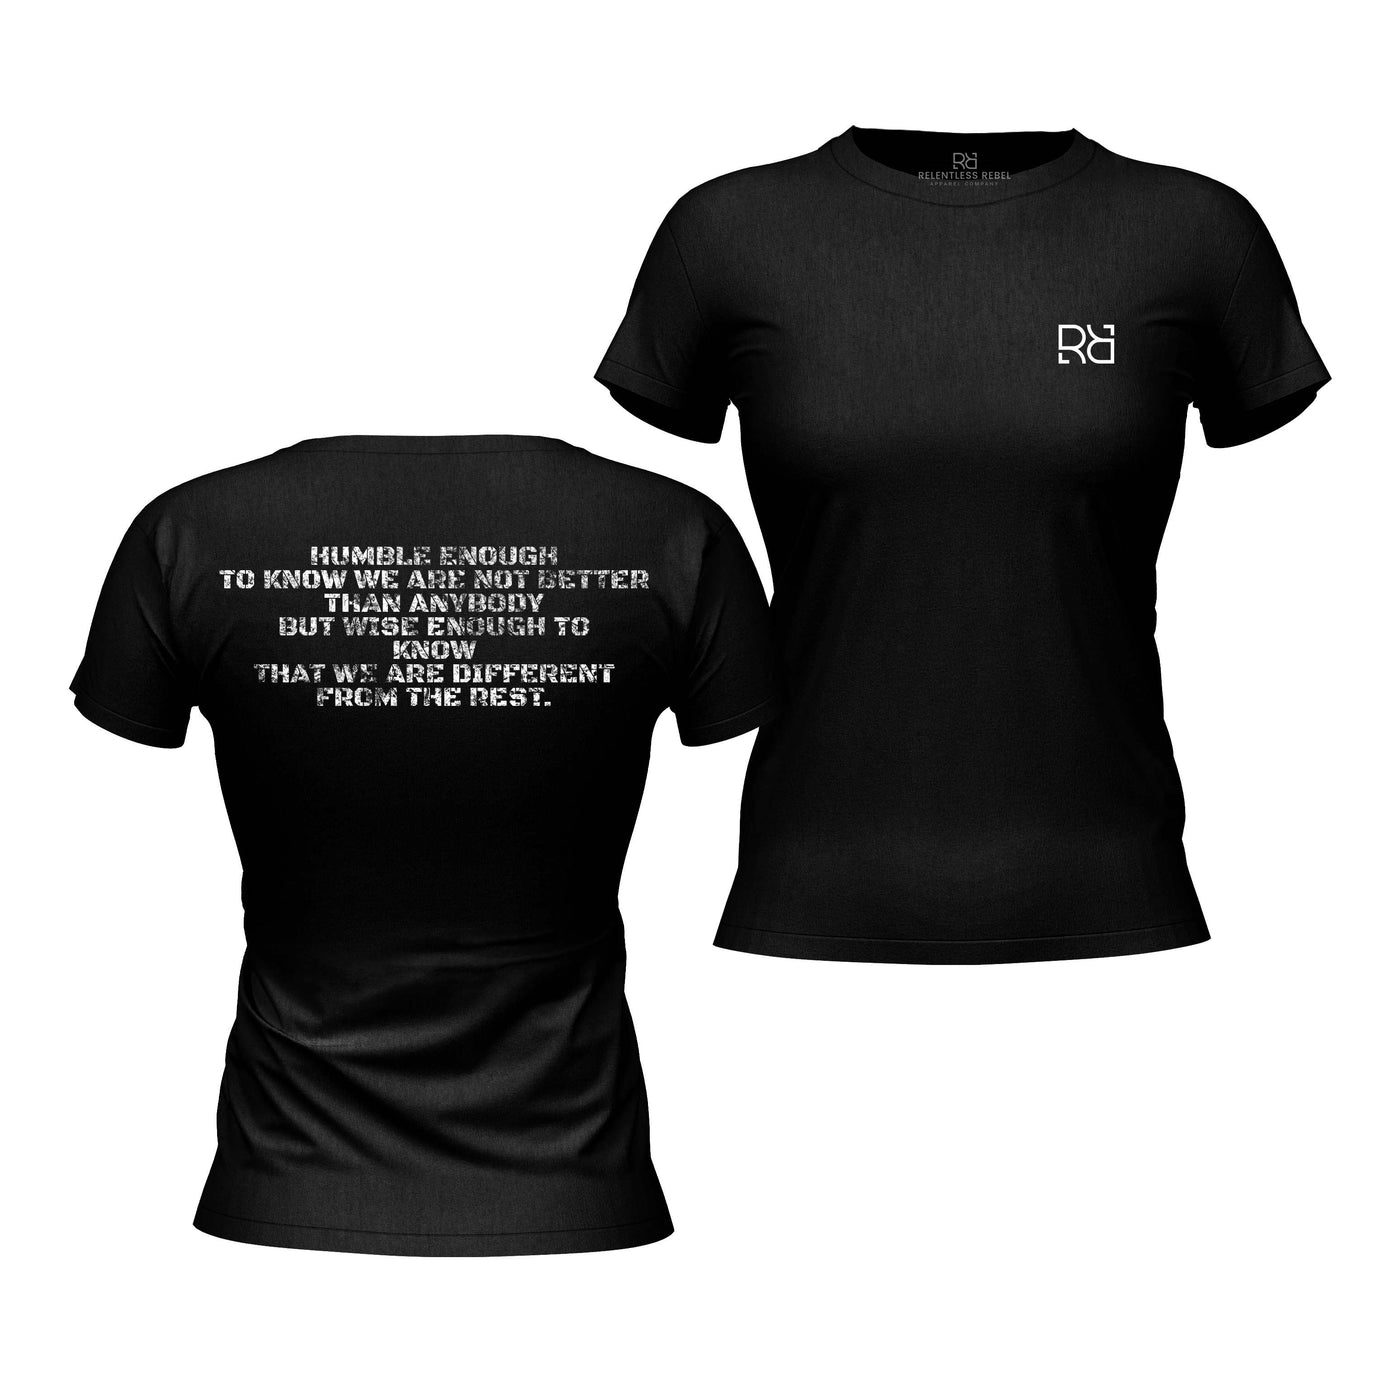 Solid Black Women's Humble Enough Back Design Tee